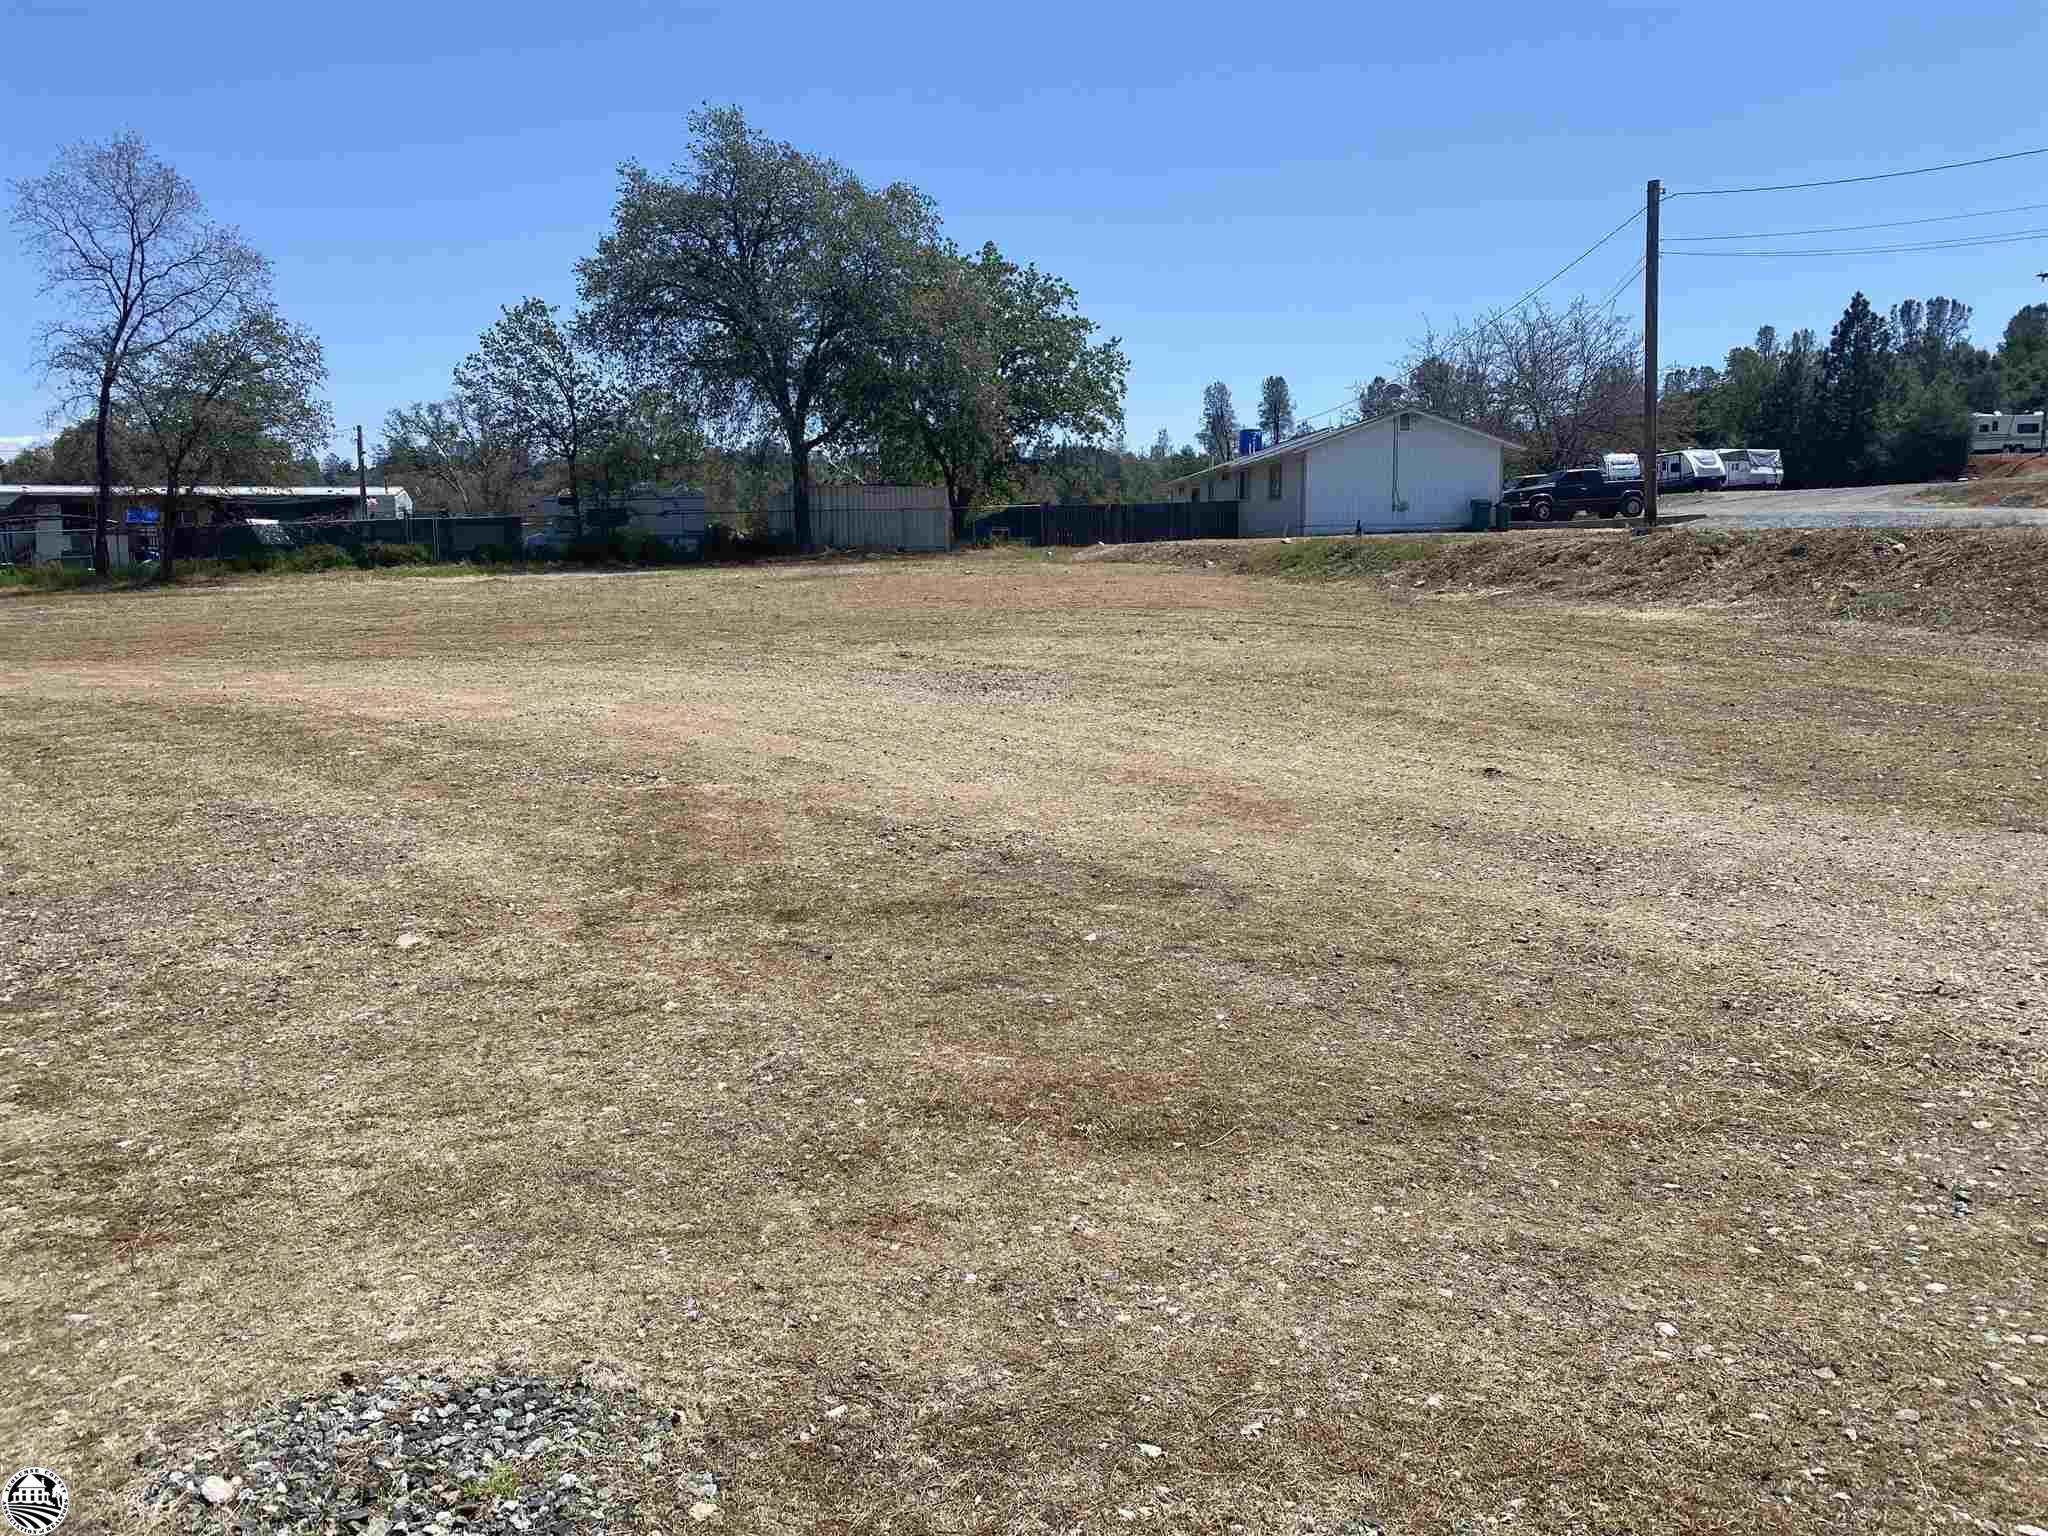 Prime commercial (zoned M-1) lot with visibility from Highway 108 in Soulsbyville!  This parcel is nearly 3/4 of an acre, flat, and ready for your plans!  District water, sewer, and three phase power are along the property.  All that is missing is you and your business!